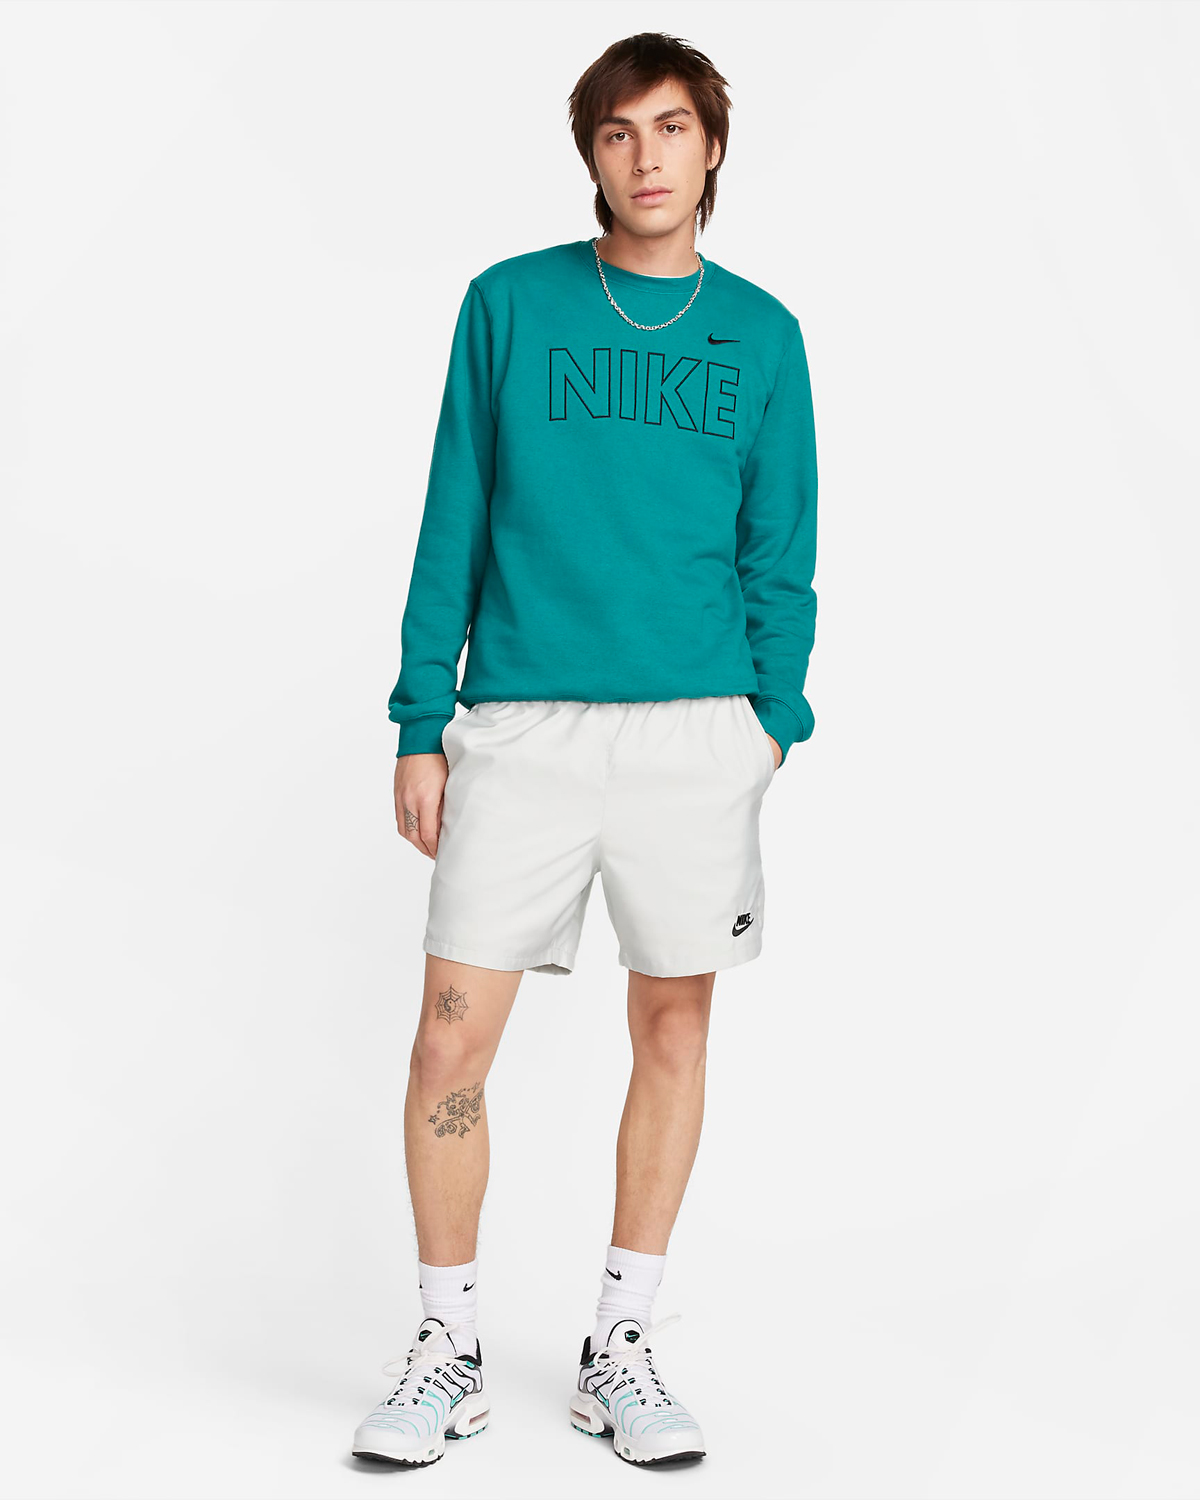 Nike Geode Teal Shirts Shorts Hats Hoodies Pants Outfits